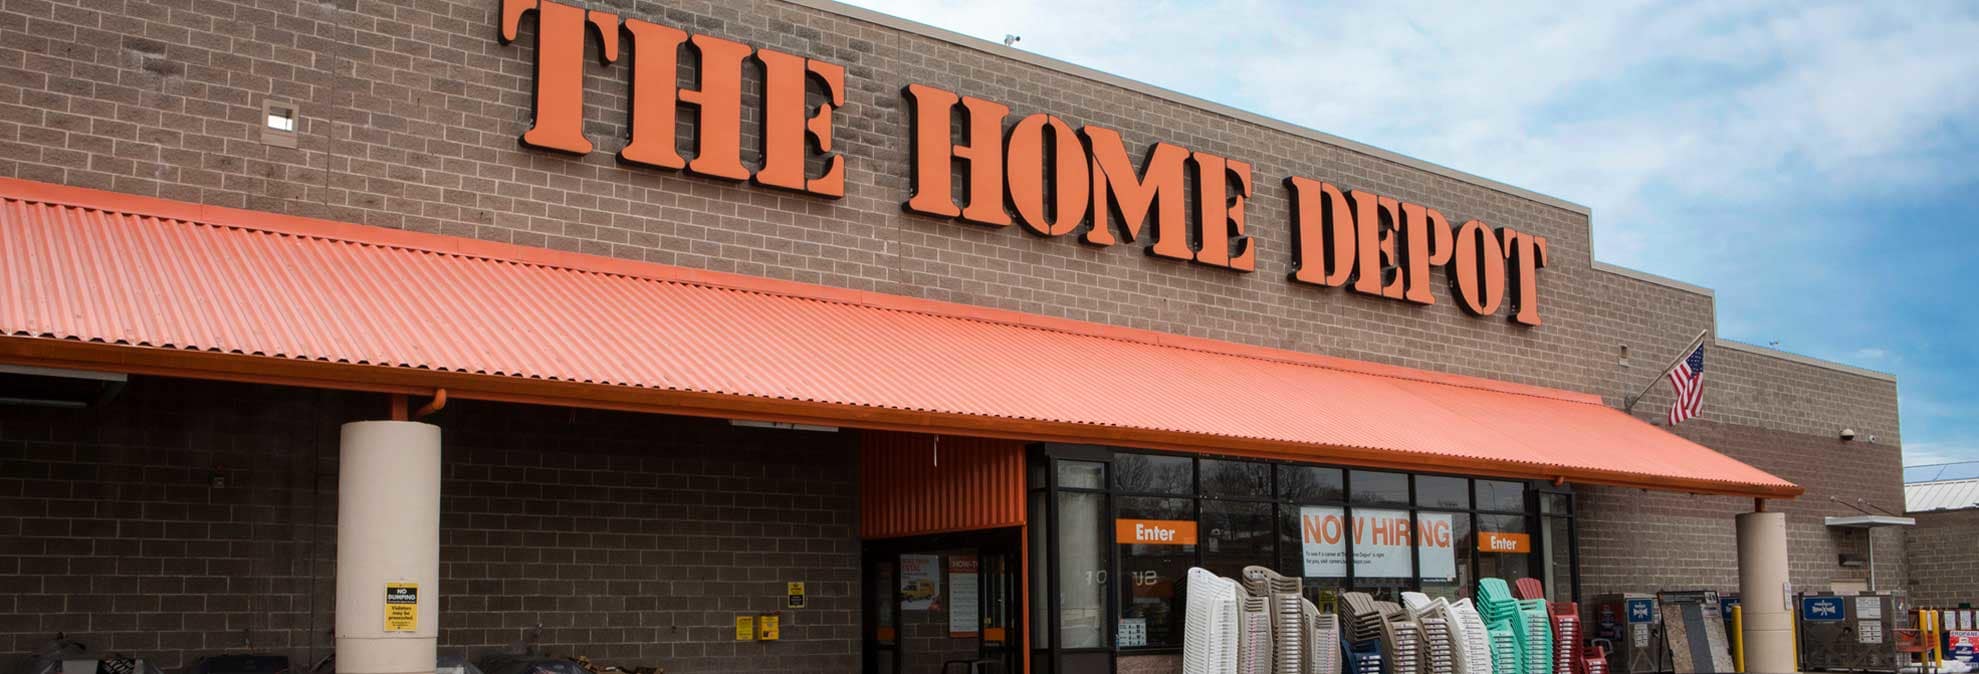 The Home Depot 1715 S 352nd St Federal Way, WA Home Depot - MapQuest